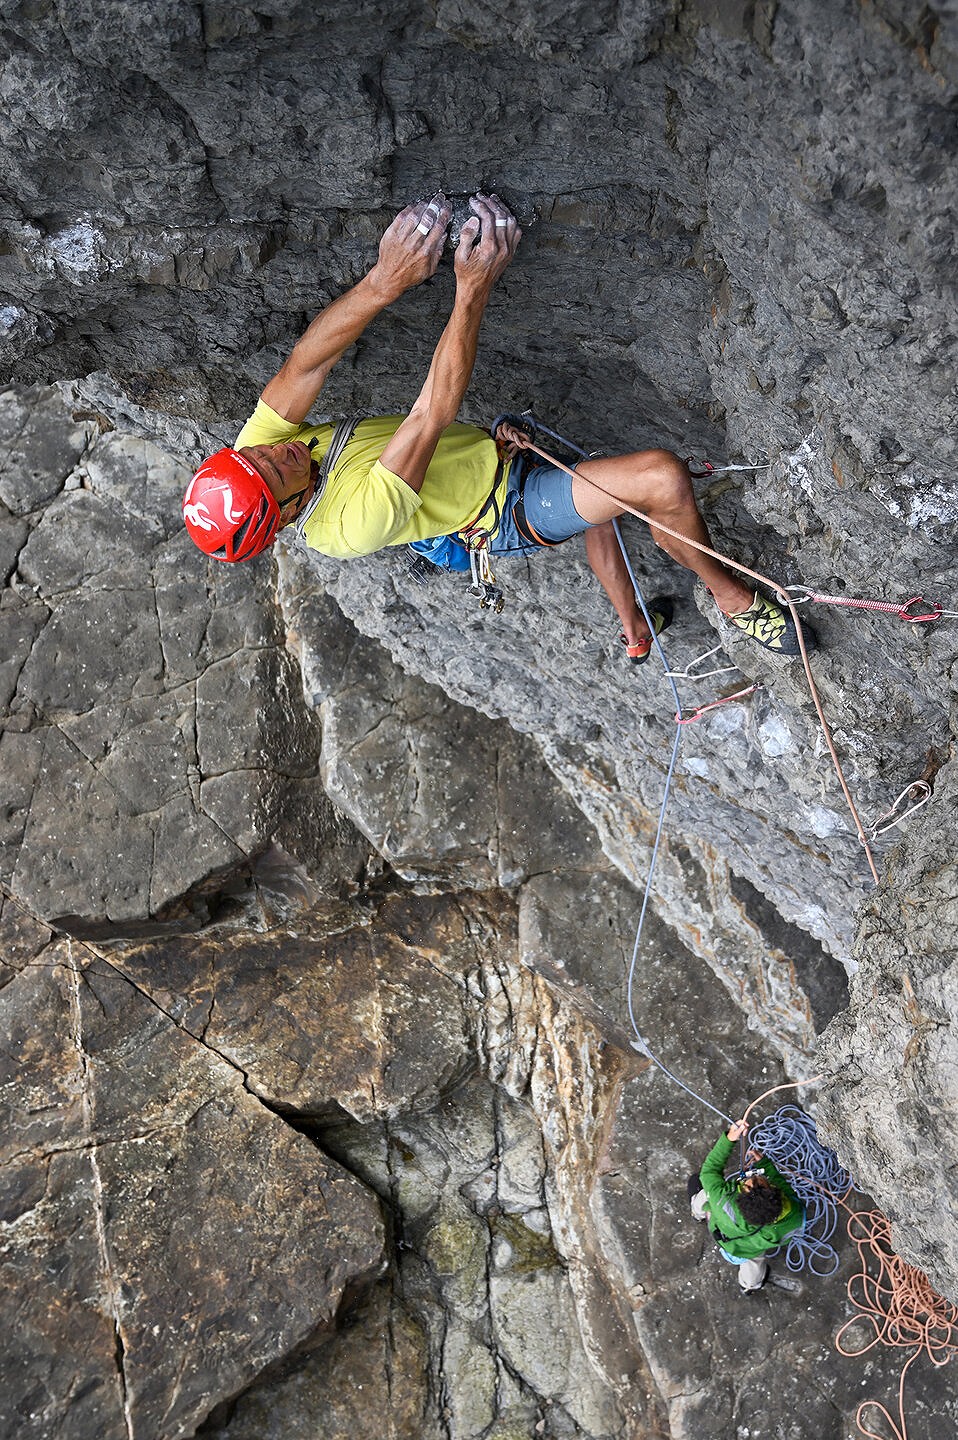 Mick Lovatt making the first ascent of Now We’re Sucking Diesel E7 6b, 6a  © Ray Wood